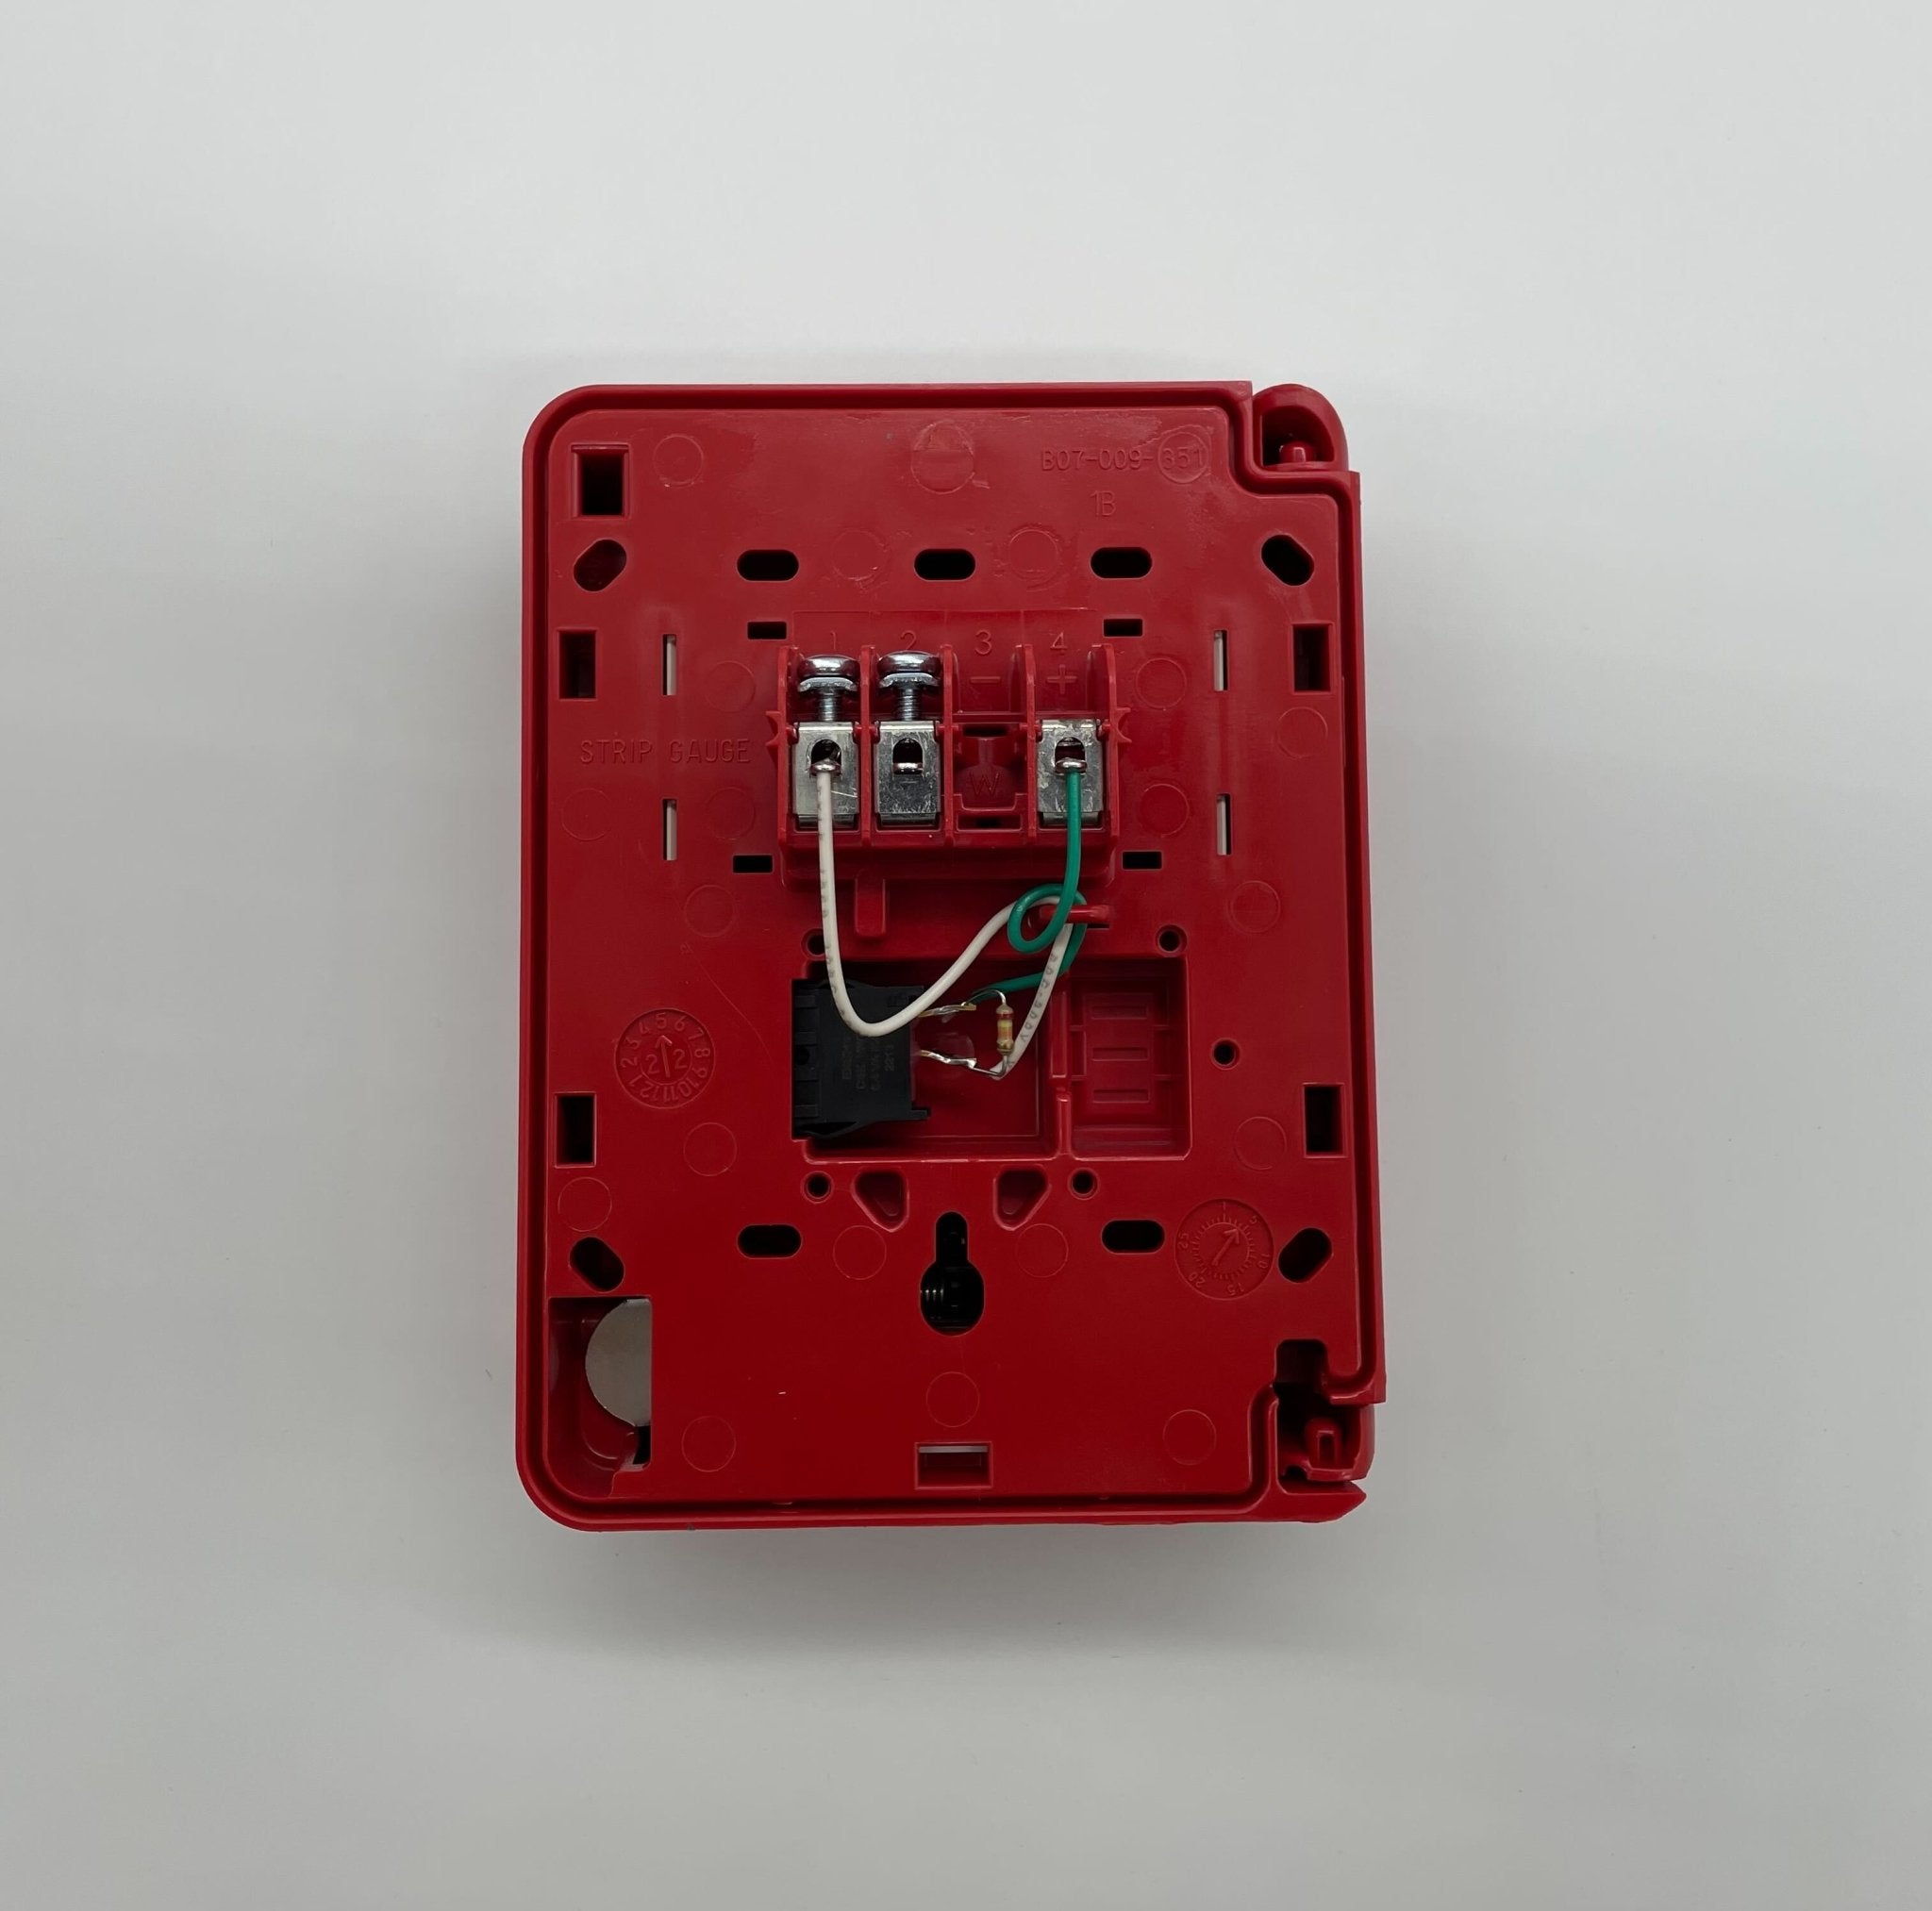 Silent Knight SK-PULL-SA Single Action Pull Station - The Fire Alarm Supplier